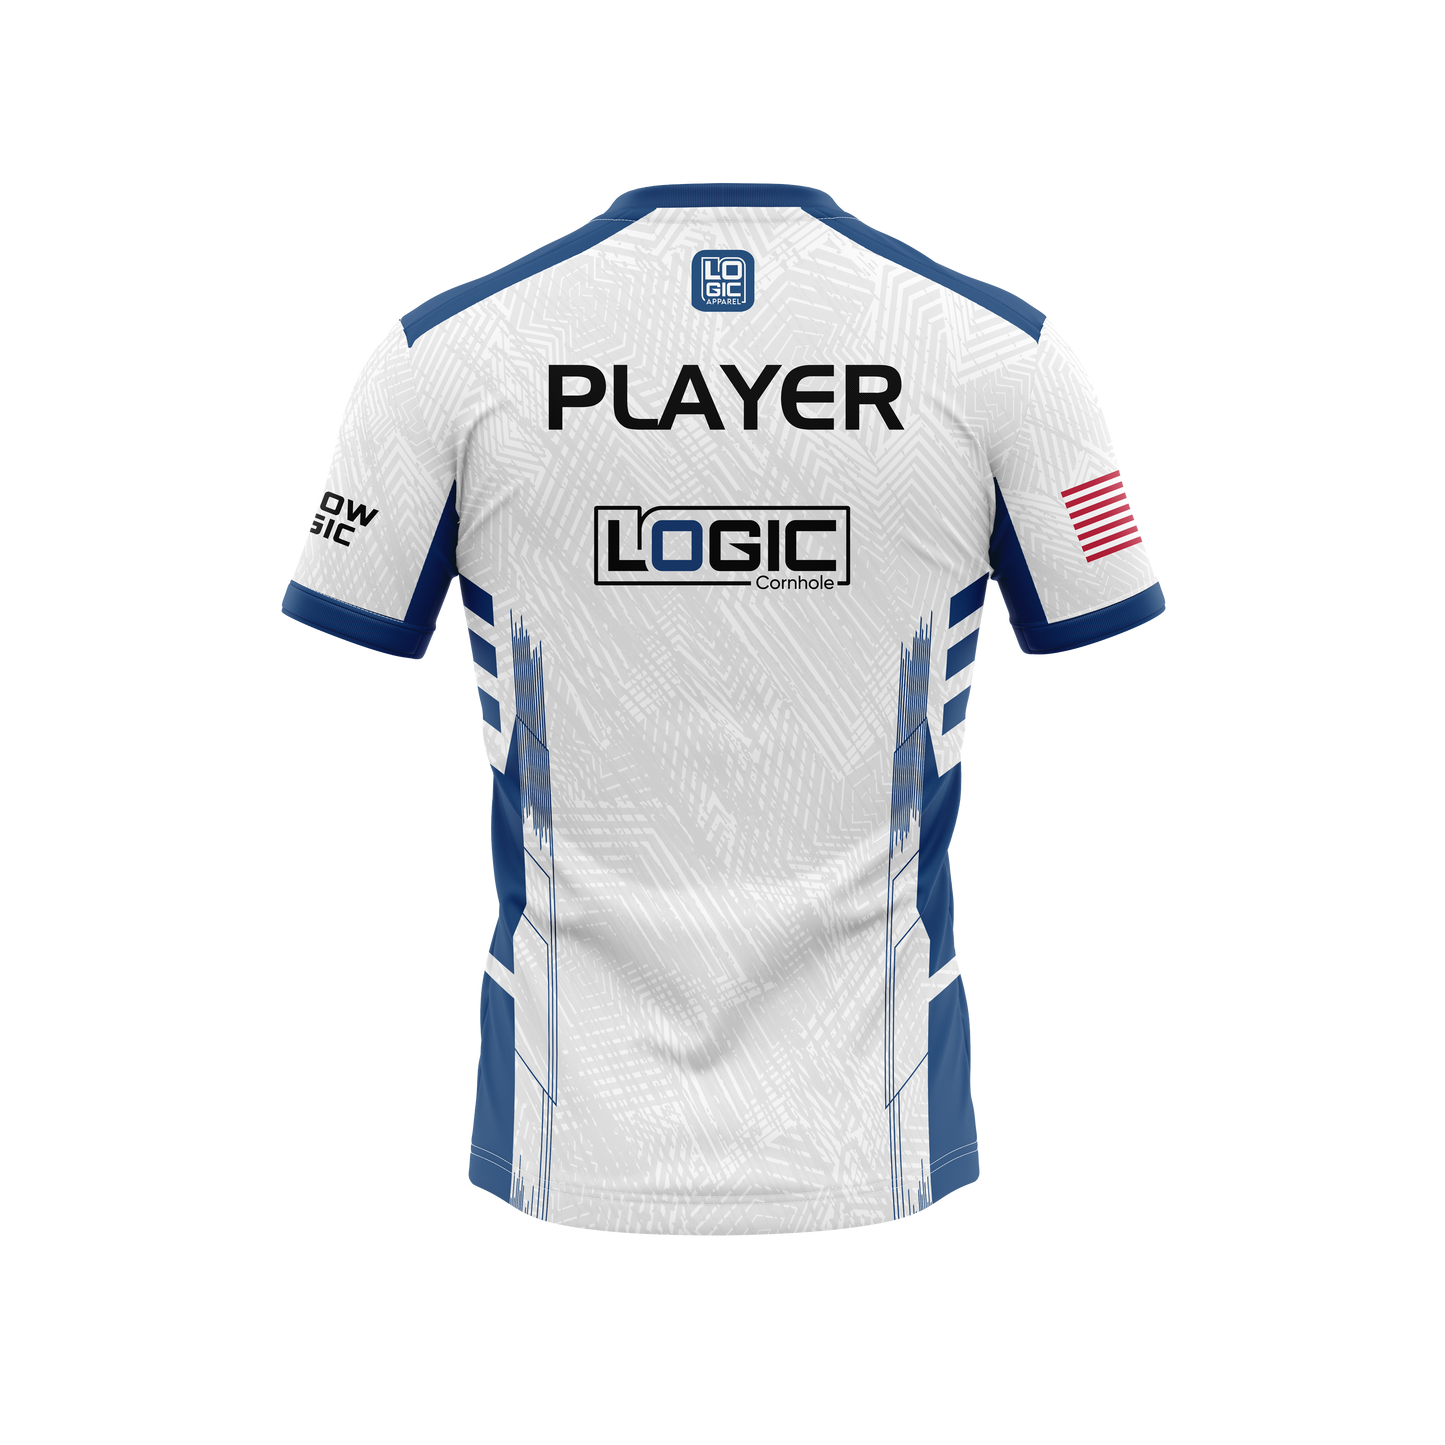 LOGIC X BAGS & BADGES Jersey Collaboration - Custom Name - (Allow 4-5 Weeks)